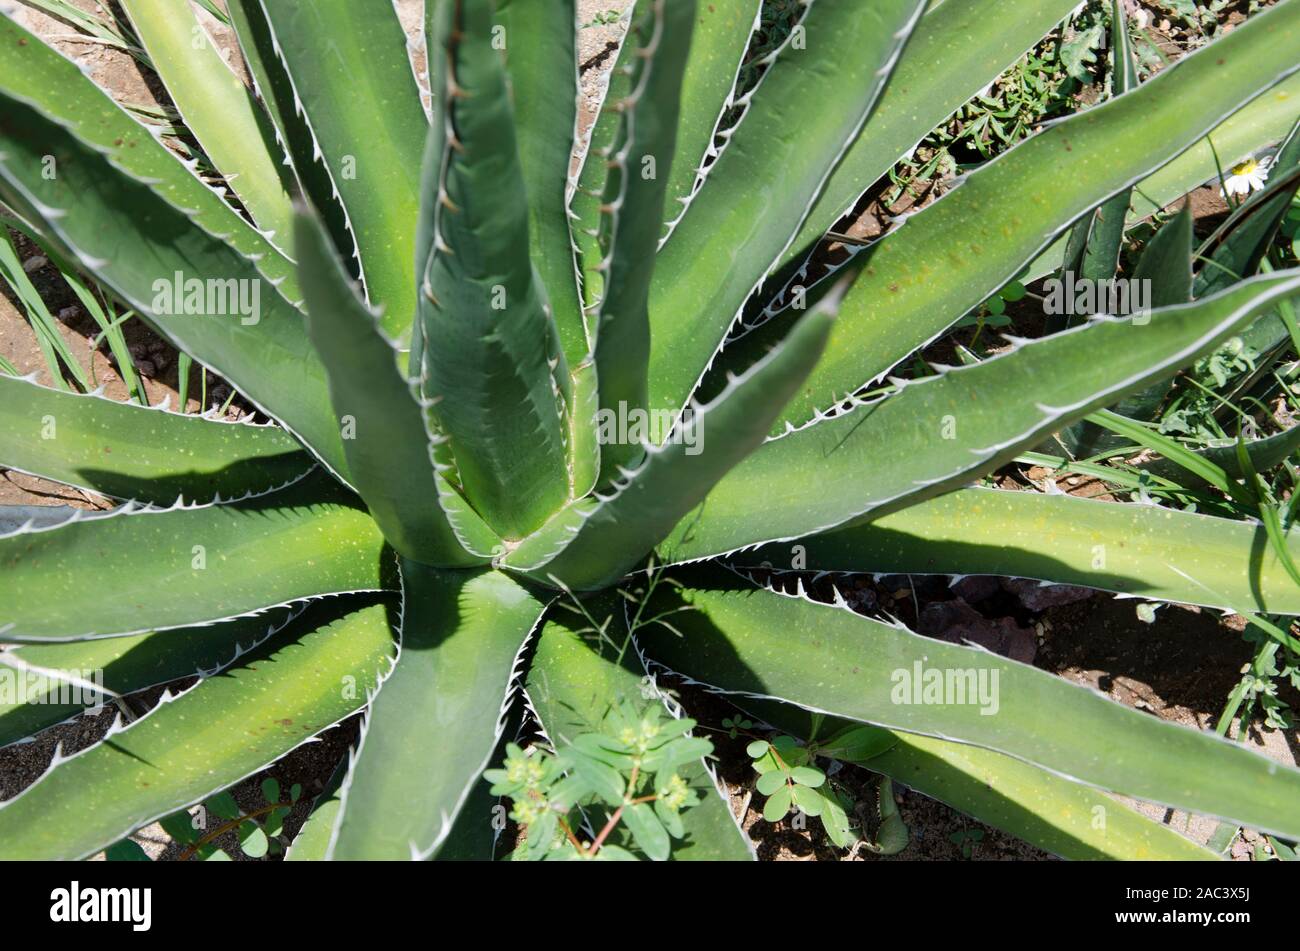 Agave kerchovei, beautiful Mexican desert plant with spiny green leaves Stock Photo